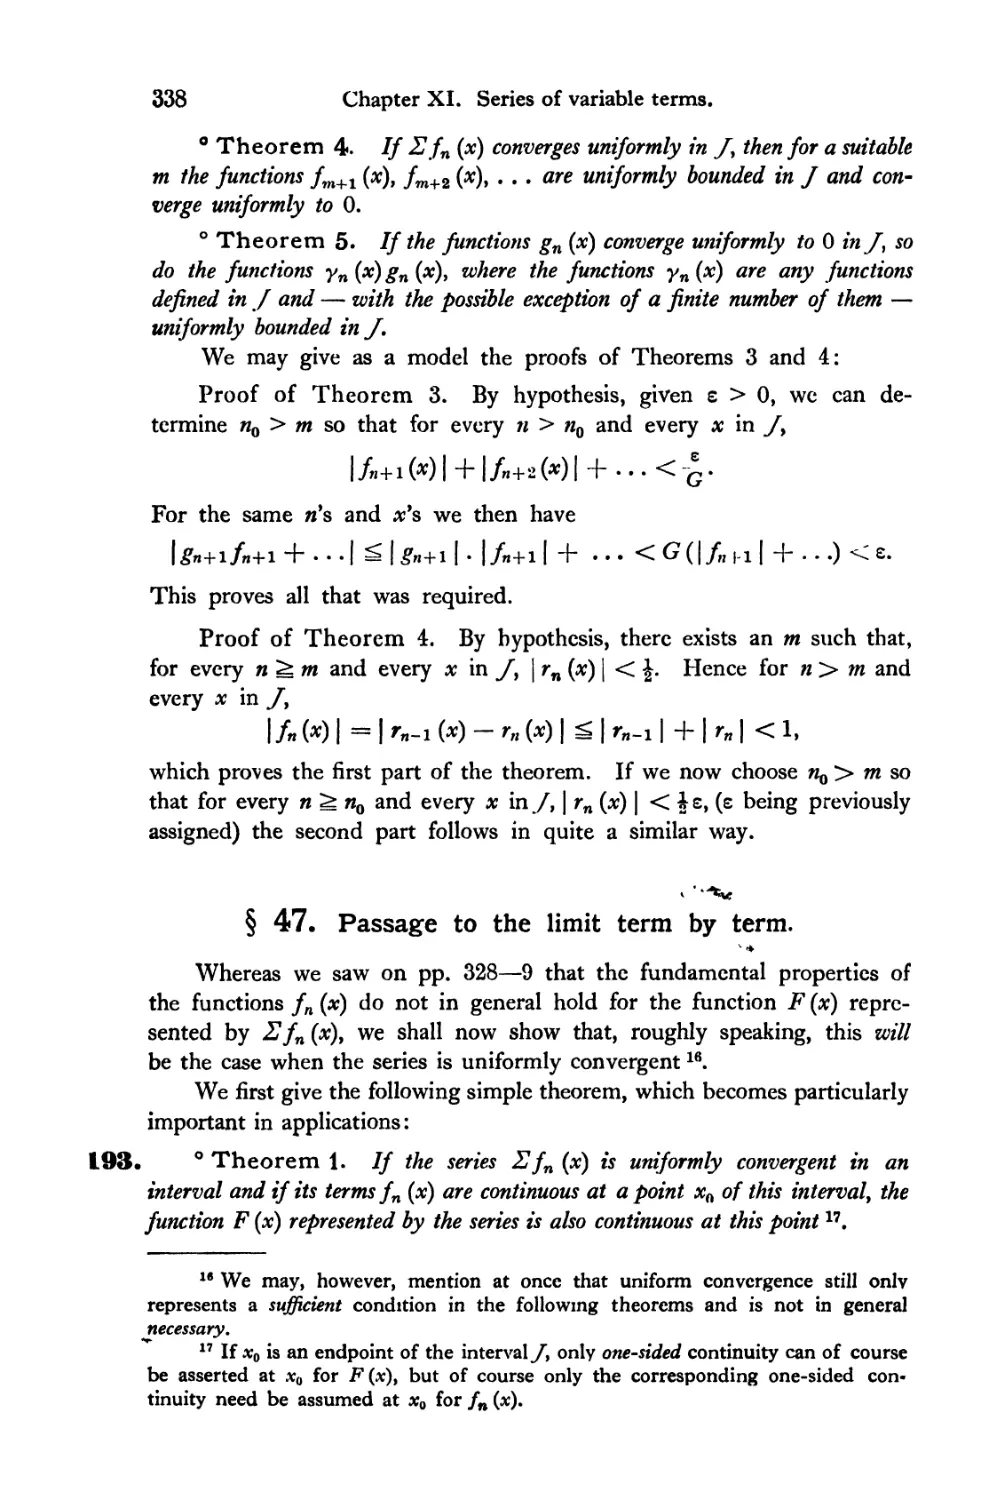 § 47. Passage to the limit term by term